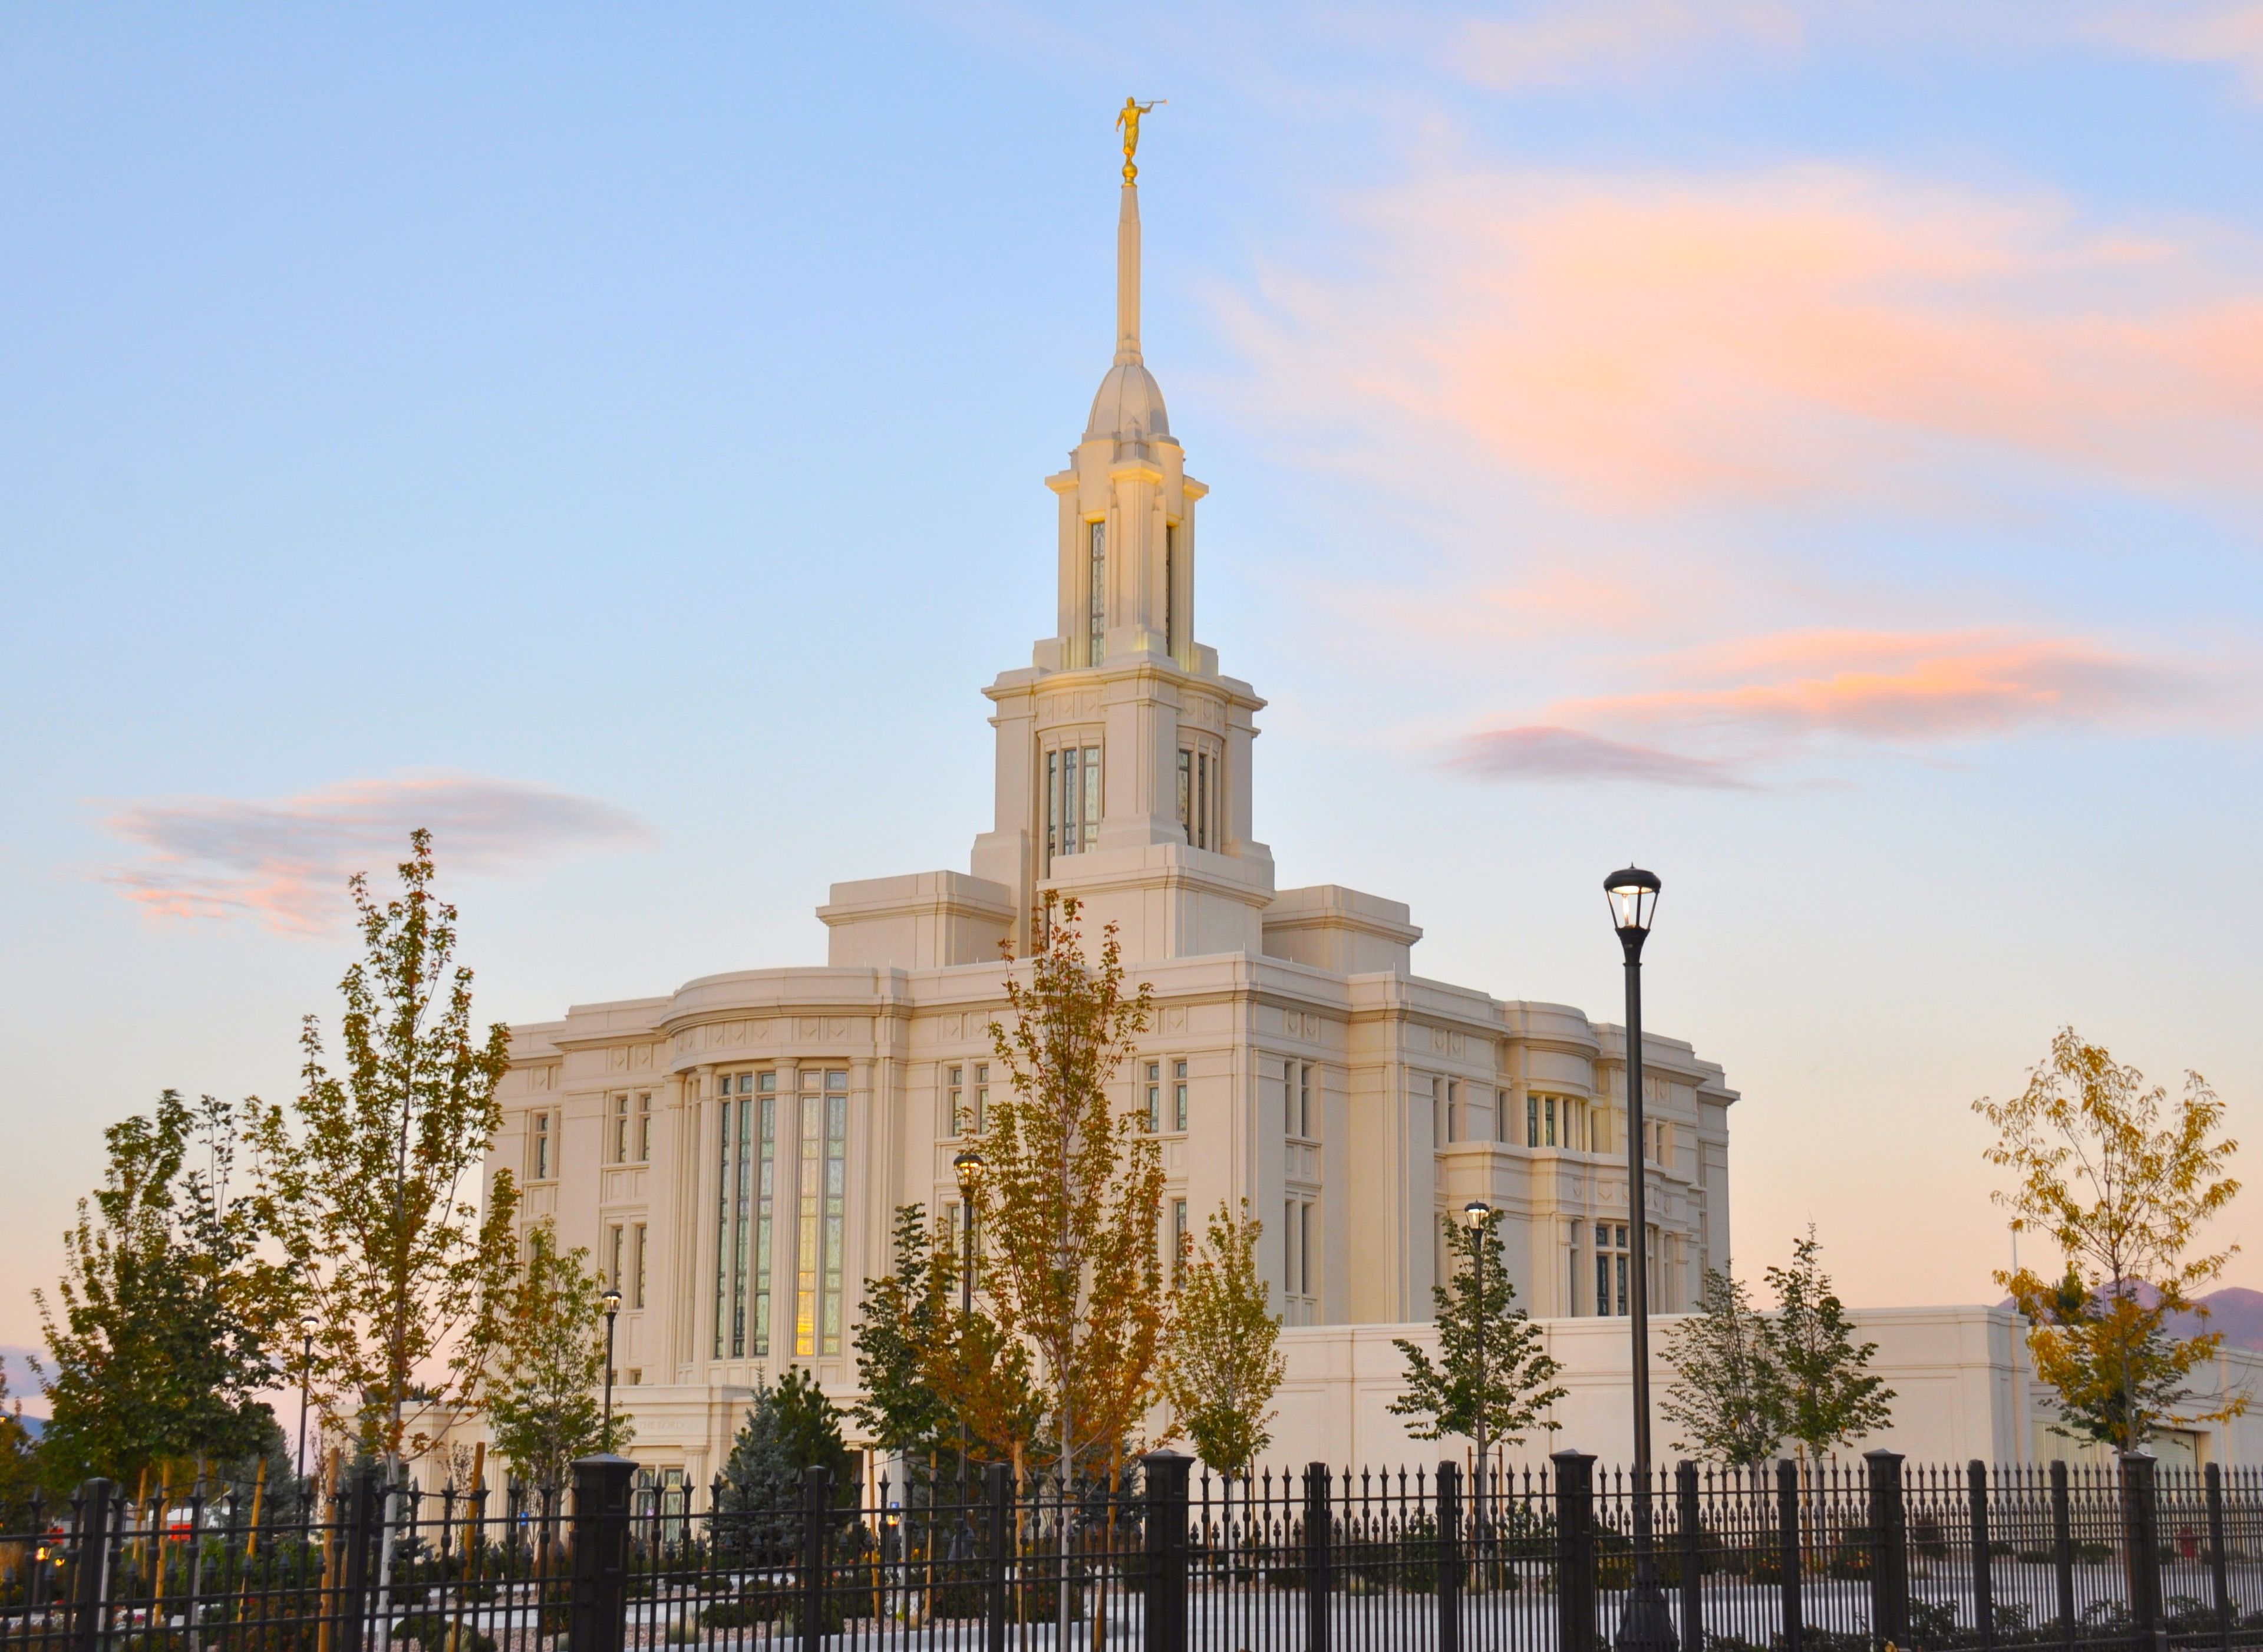 An angle view of the Payson Utah Temple during sunset.